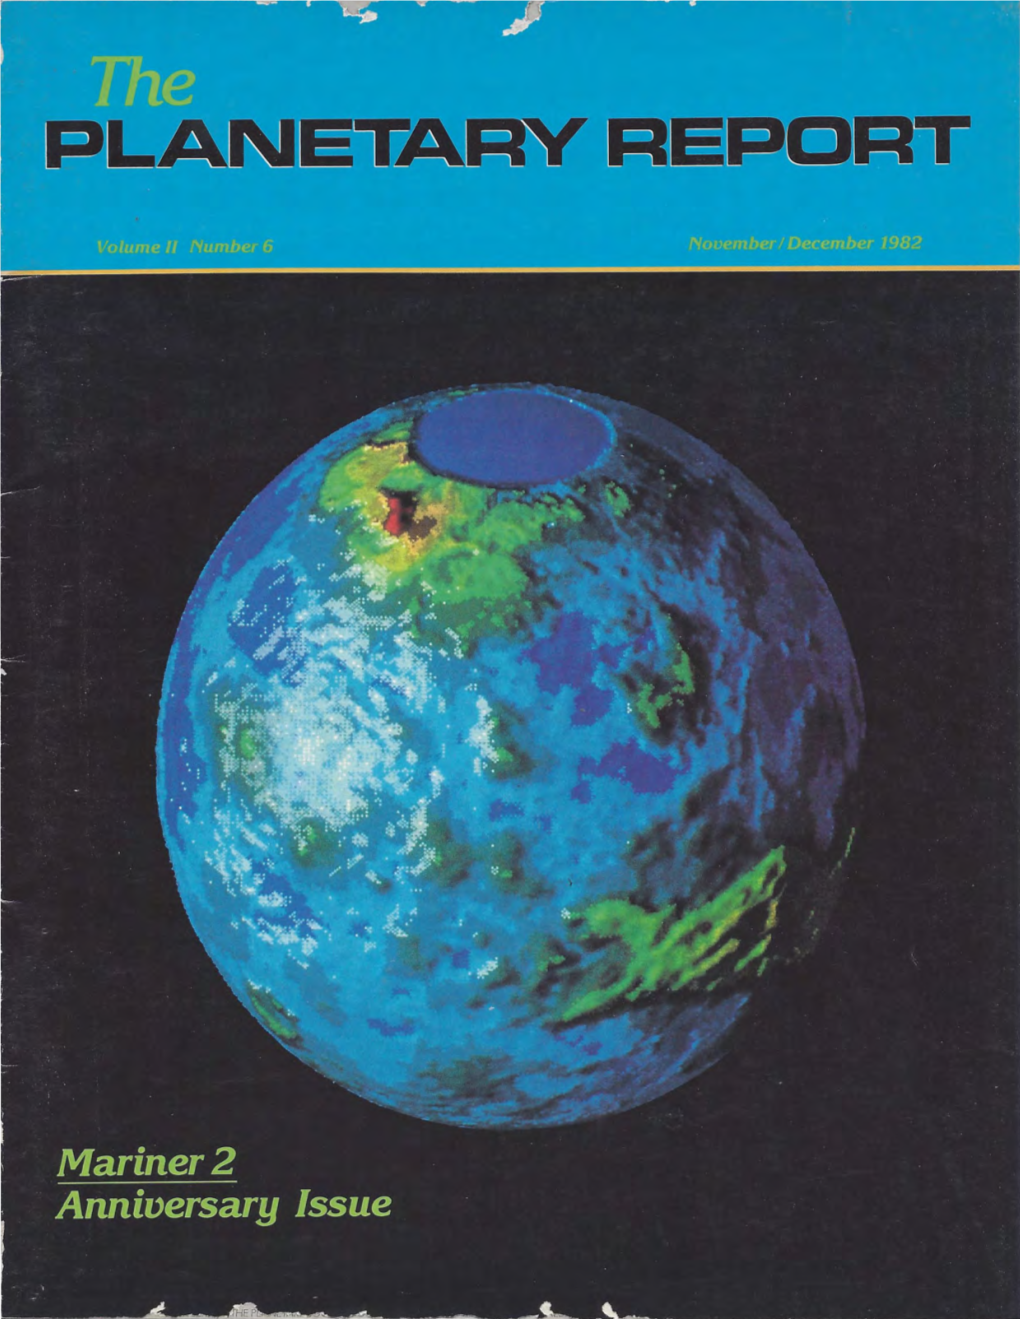 The Planetary Report Is Published Six Times Yearly G, Edward Danielson, Found the Comet on October 16, 1982, and Verified Their Observations on October 19